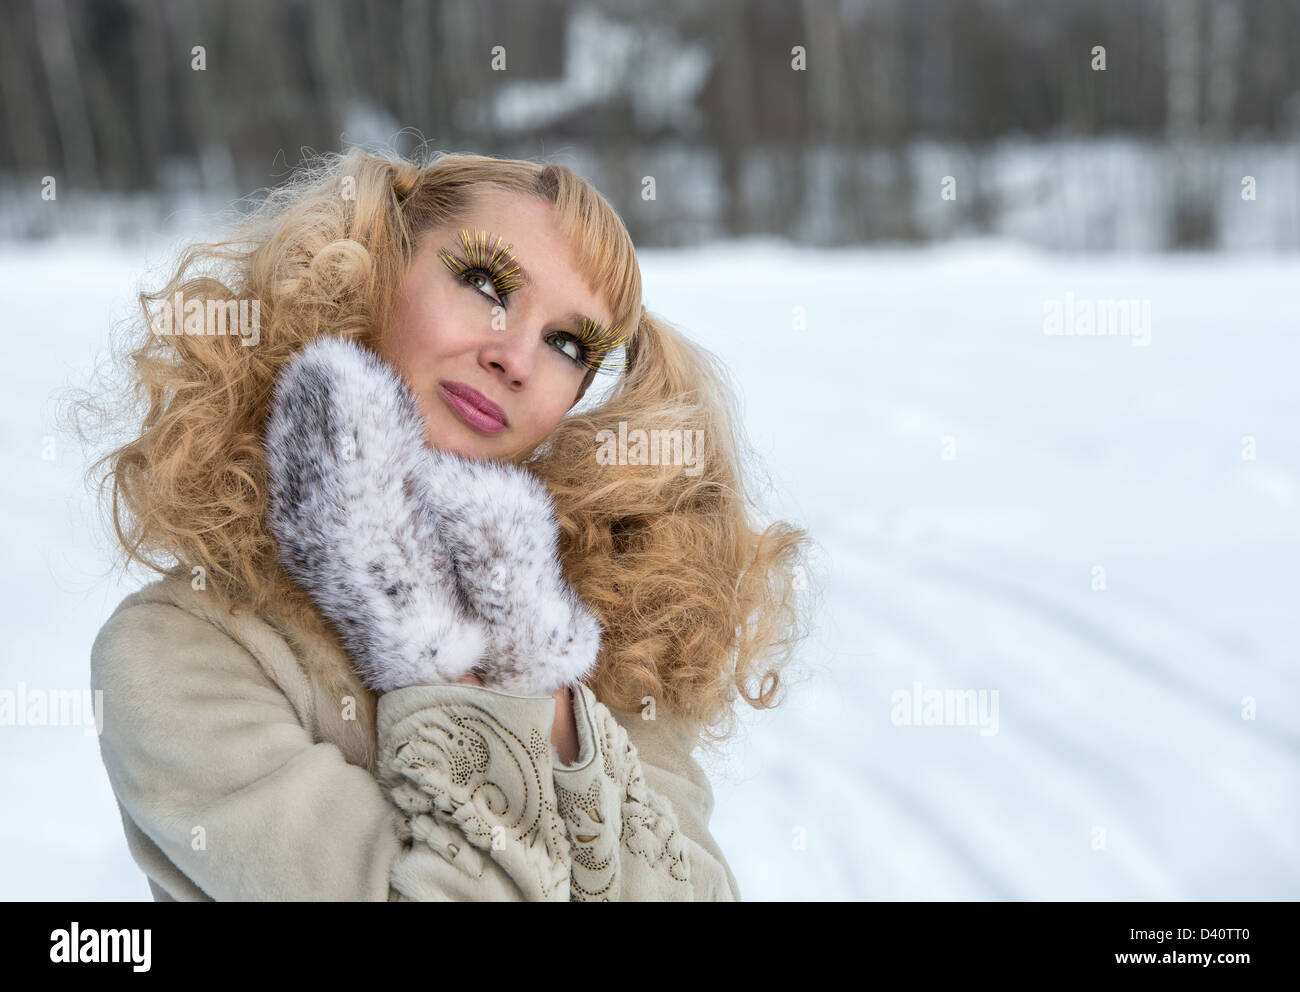 Giddy young woman with exaggerated cilia in a winter field Stock Photo